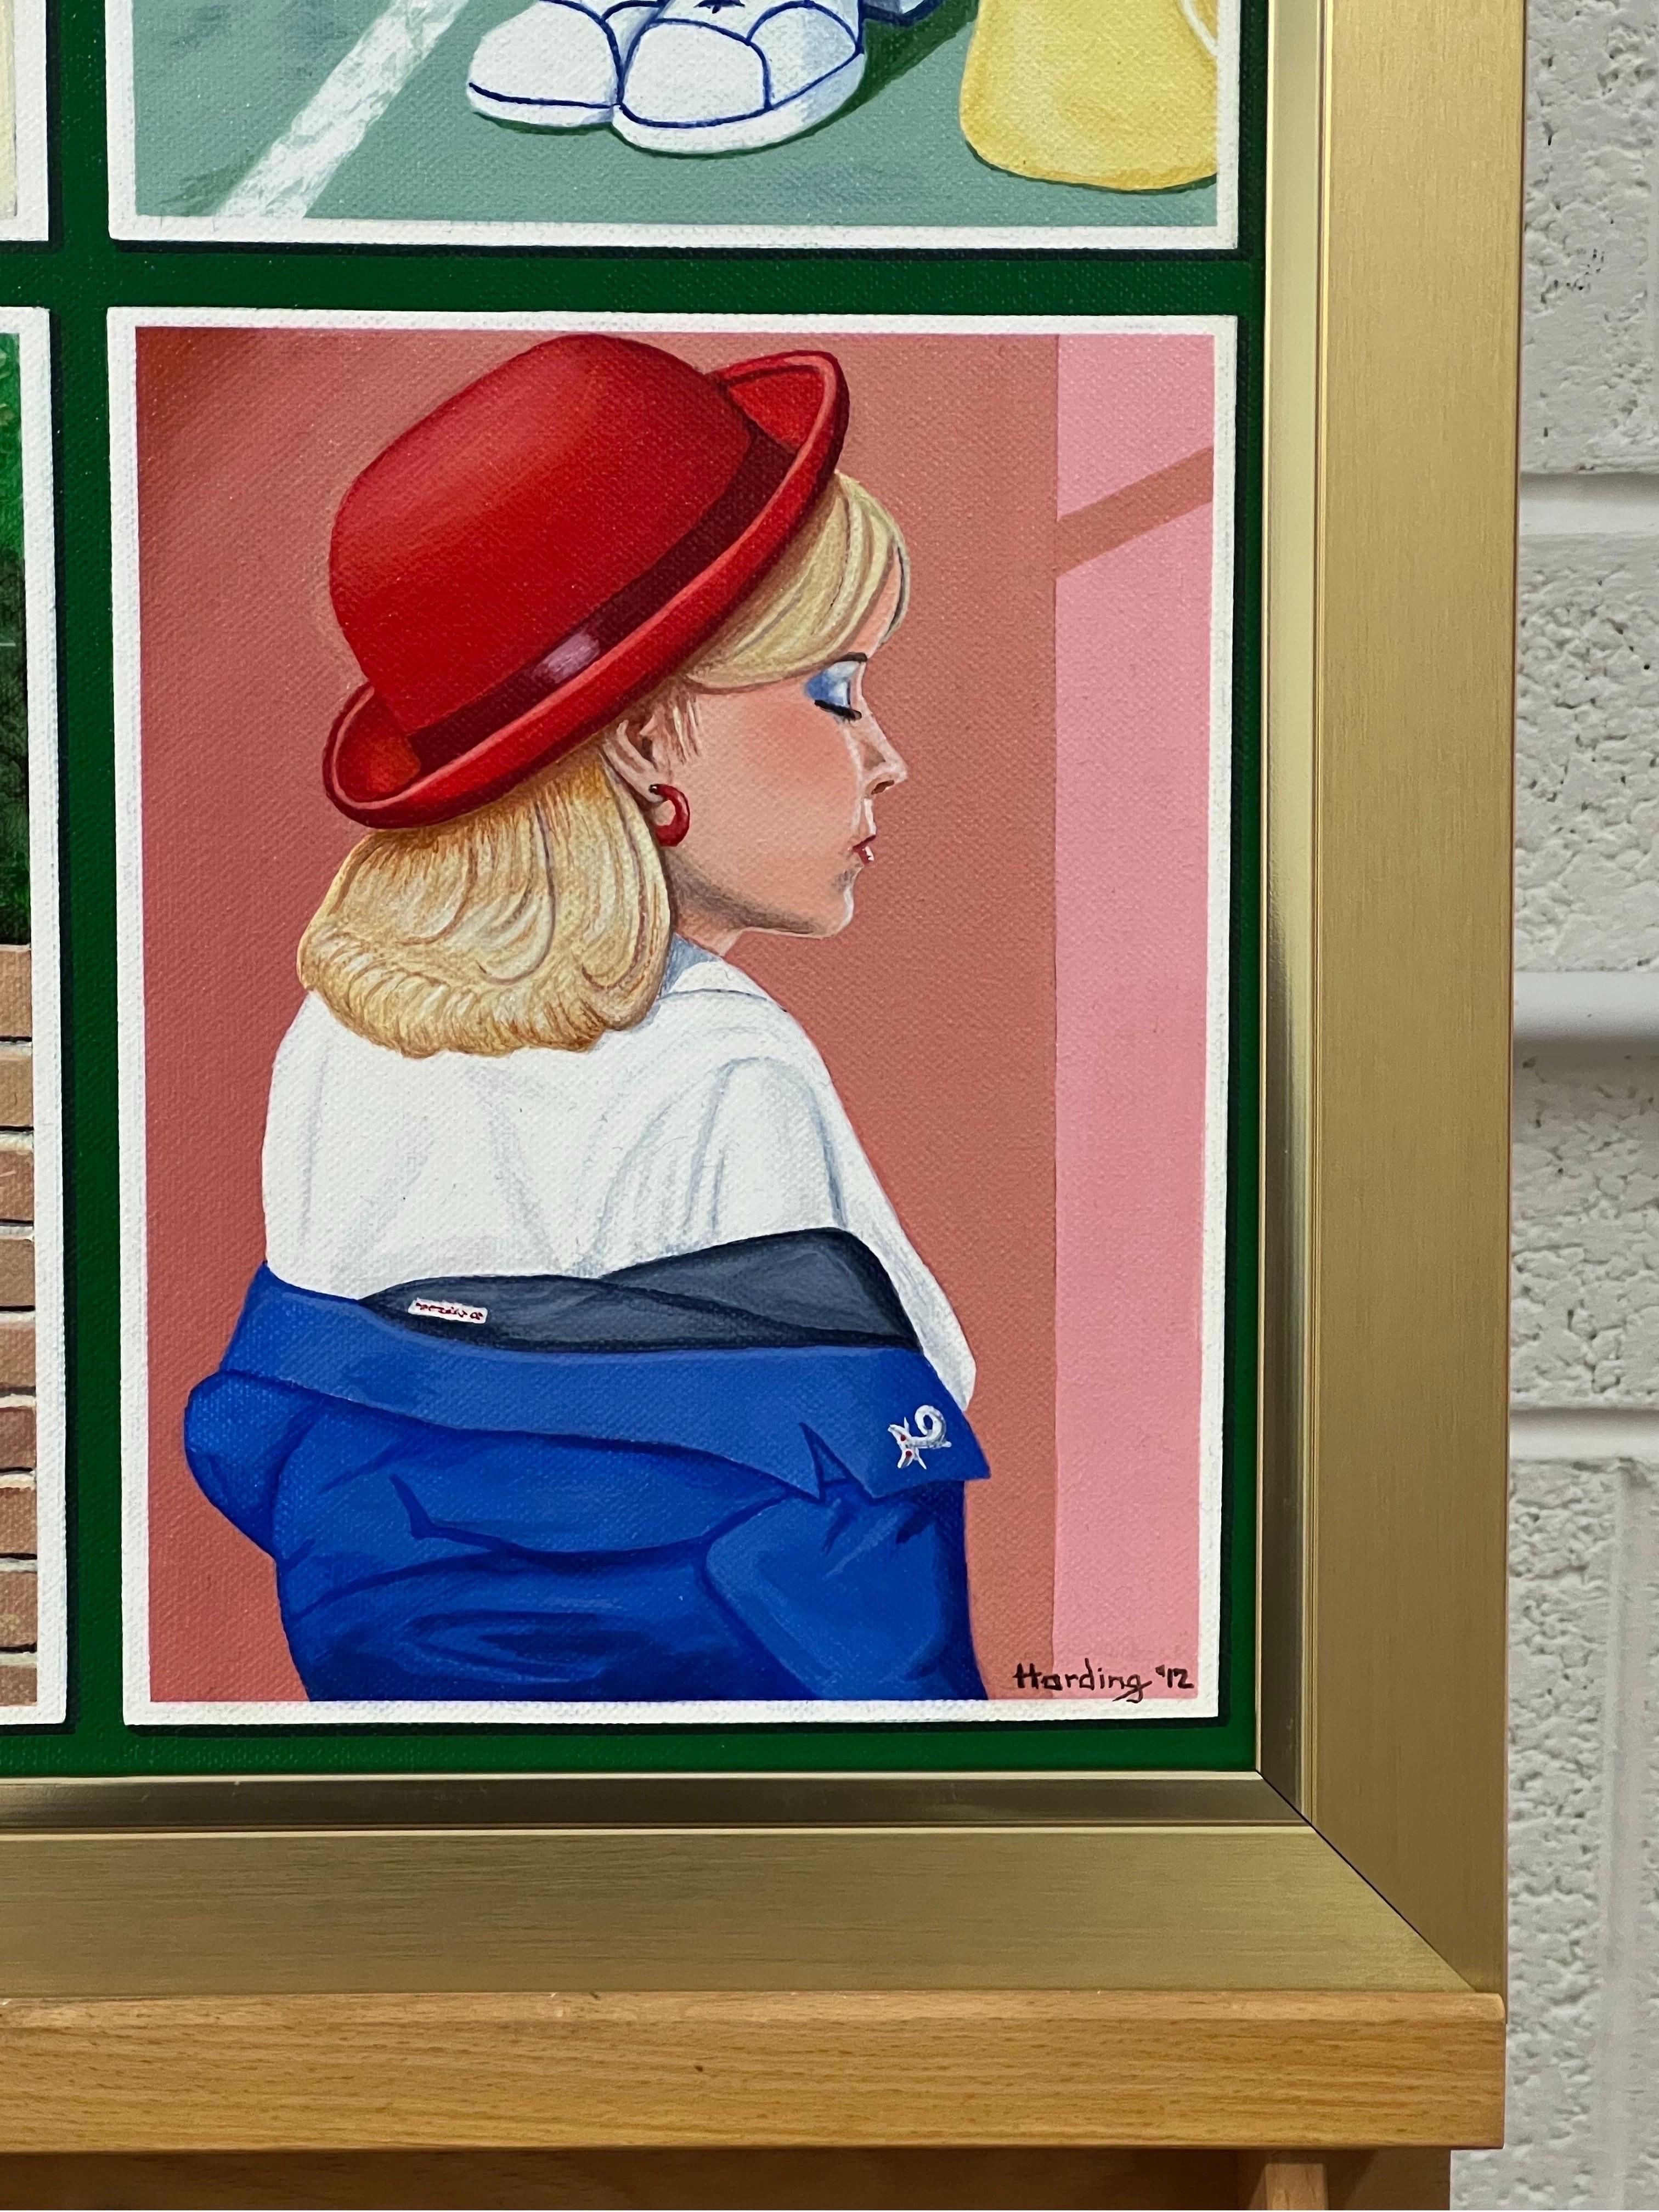 Vintage English Woman Tennis Player Picnic Basket Smoking 1960's 1970's England entitled ‘Love, Hate, Kiss, Or Adore’ by Retro Nostalgic Artist, Paul F Harding. Signed, Original, Oil on Canvas. Presented in a gold frame.

Art measures 20 x 16